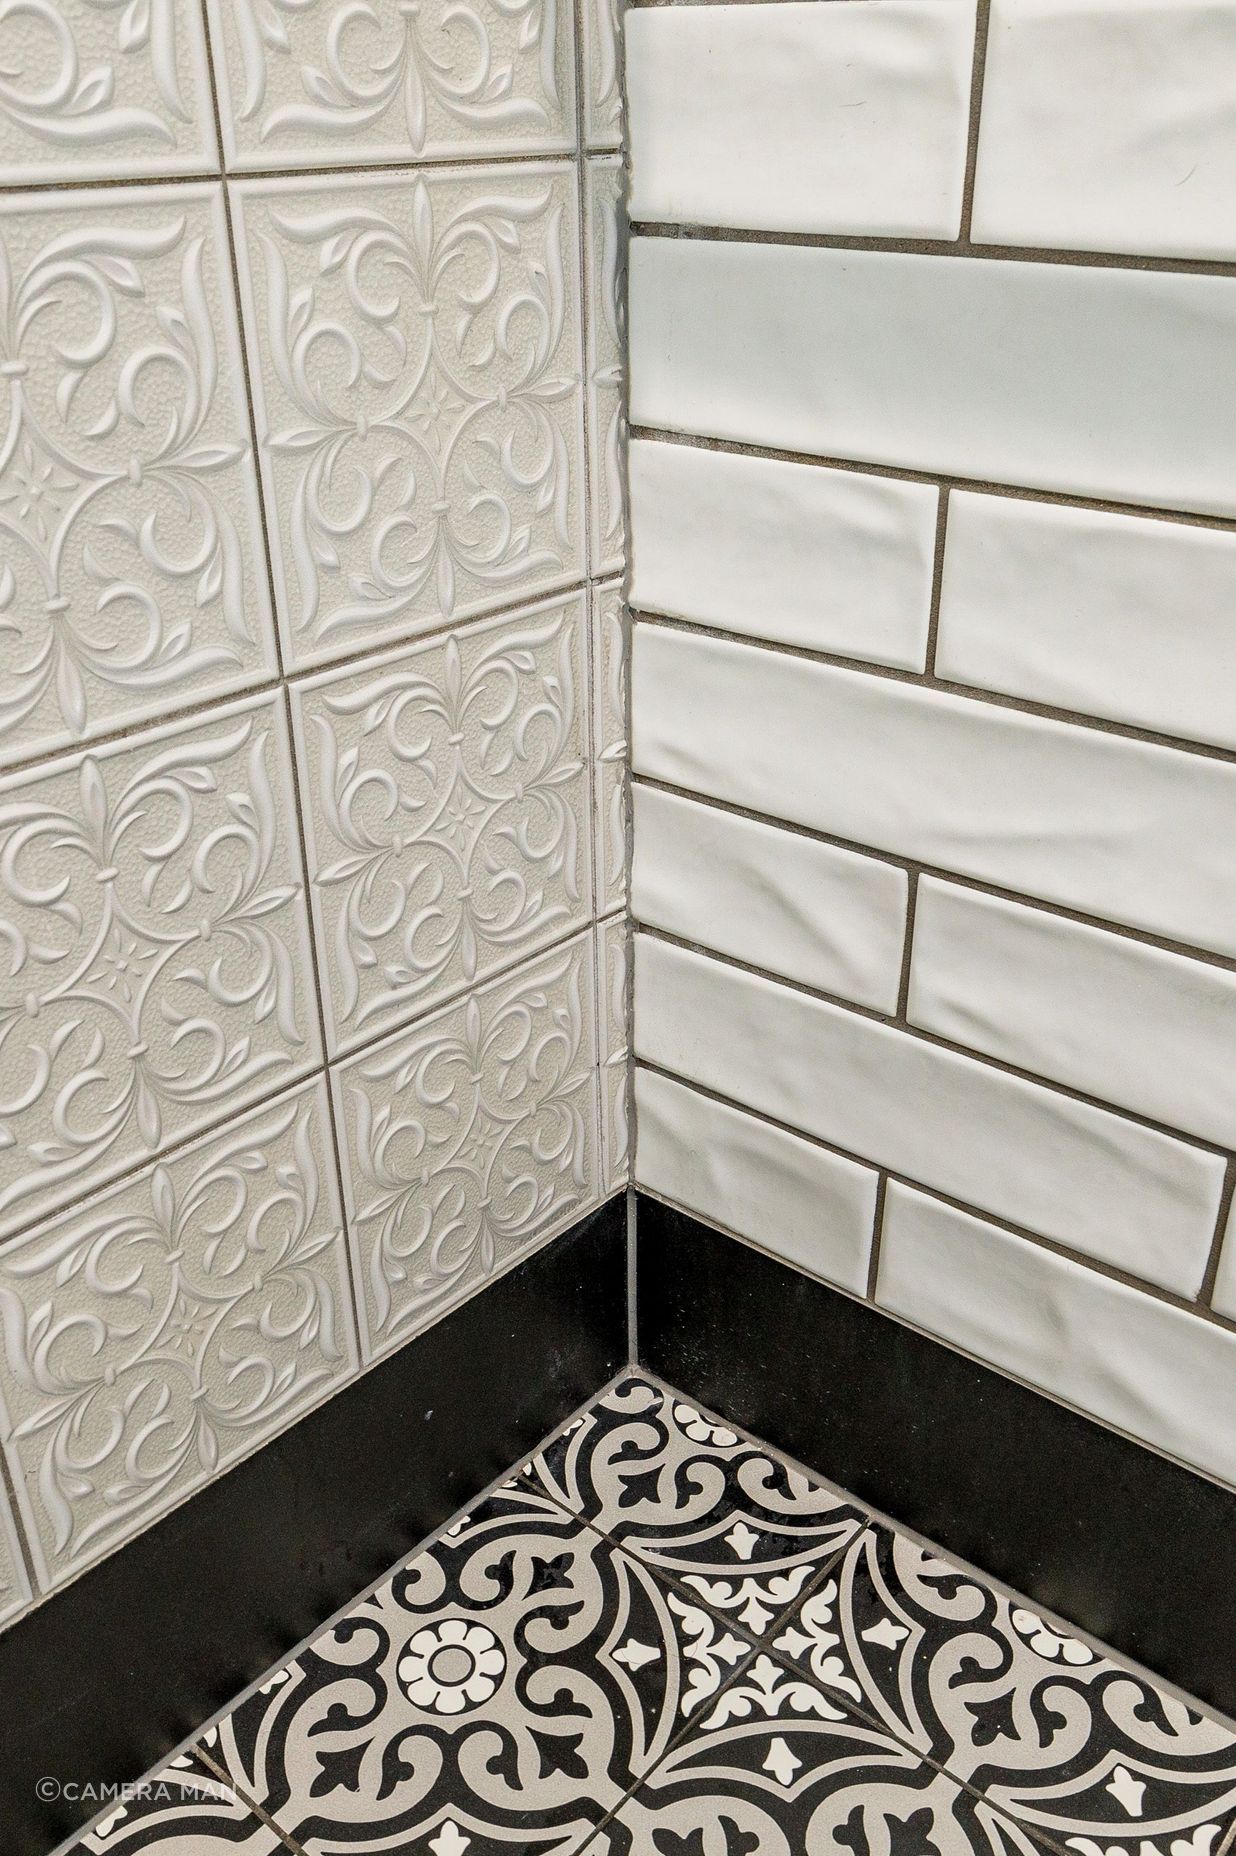 In this black &amp; white bathroom the goal was to create a traditional charm. The floor tiles are Tile Warehouse - Element - Arabesque with the skirt tile Tile Warehouse -Pure Black Matt. The textured subway tiles are Tile Space - MT1366 - Marlow Cloud Gloss and the decorative antique embossed pattern tile is Tile Depot - Antigua Muse White.